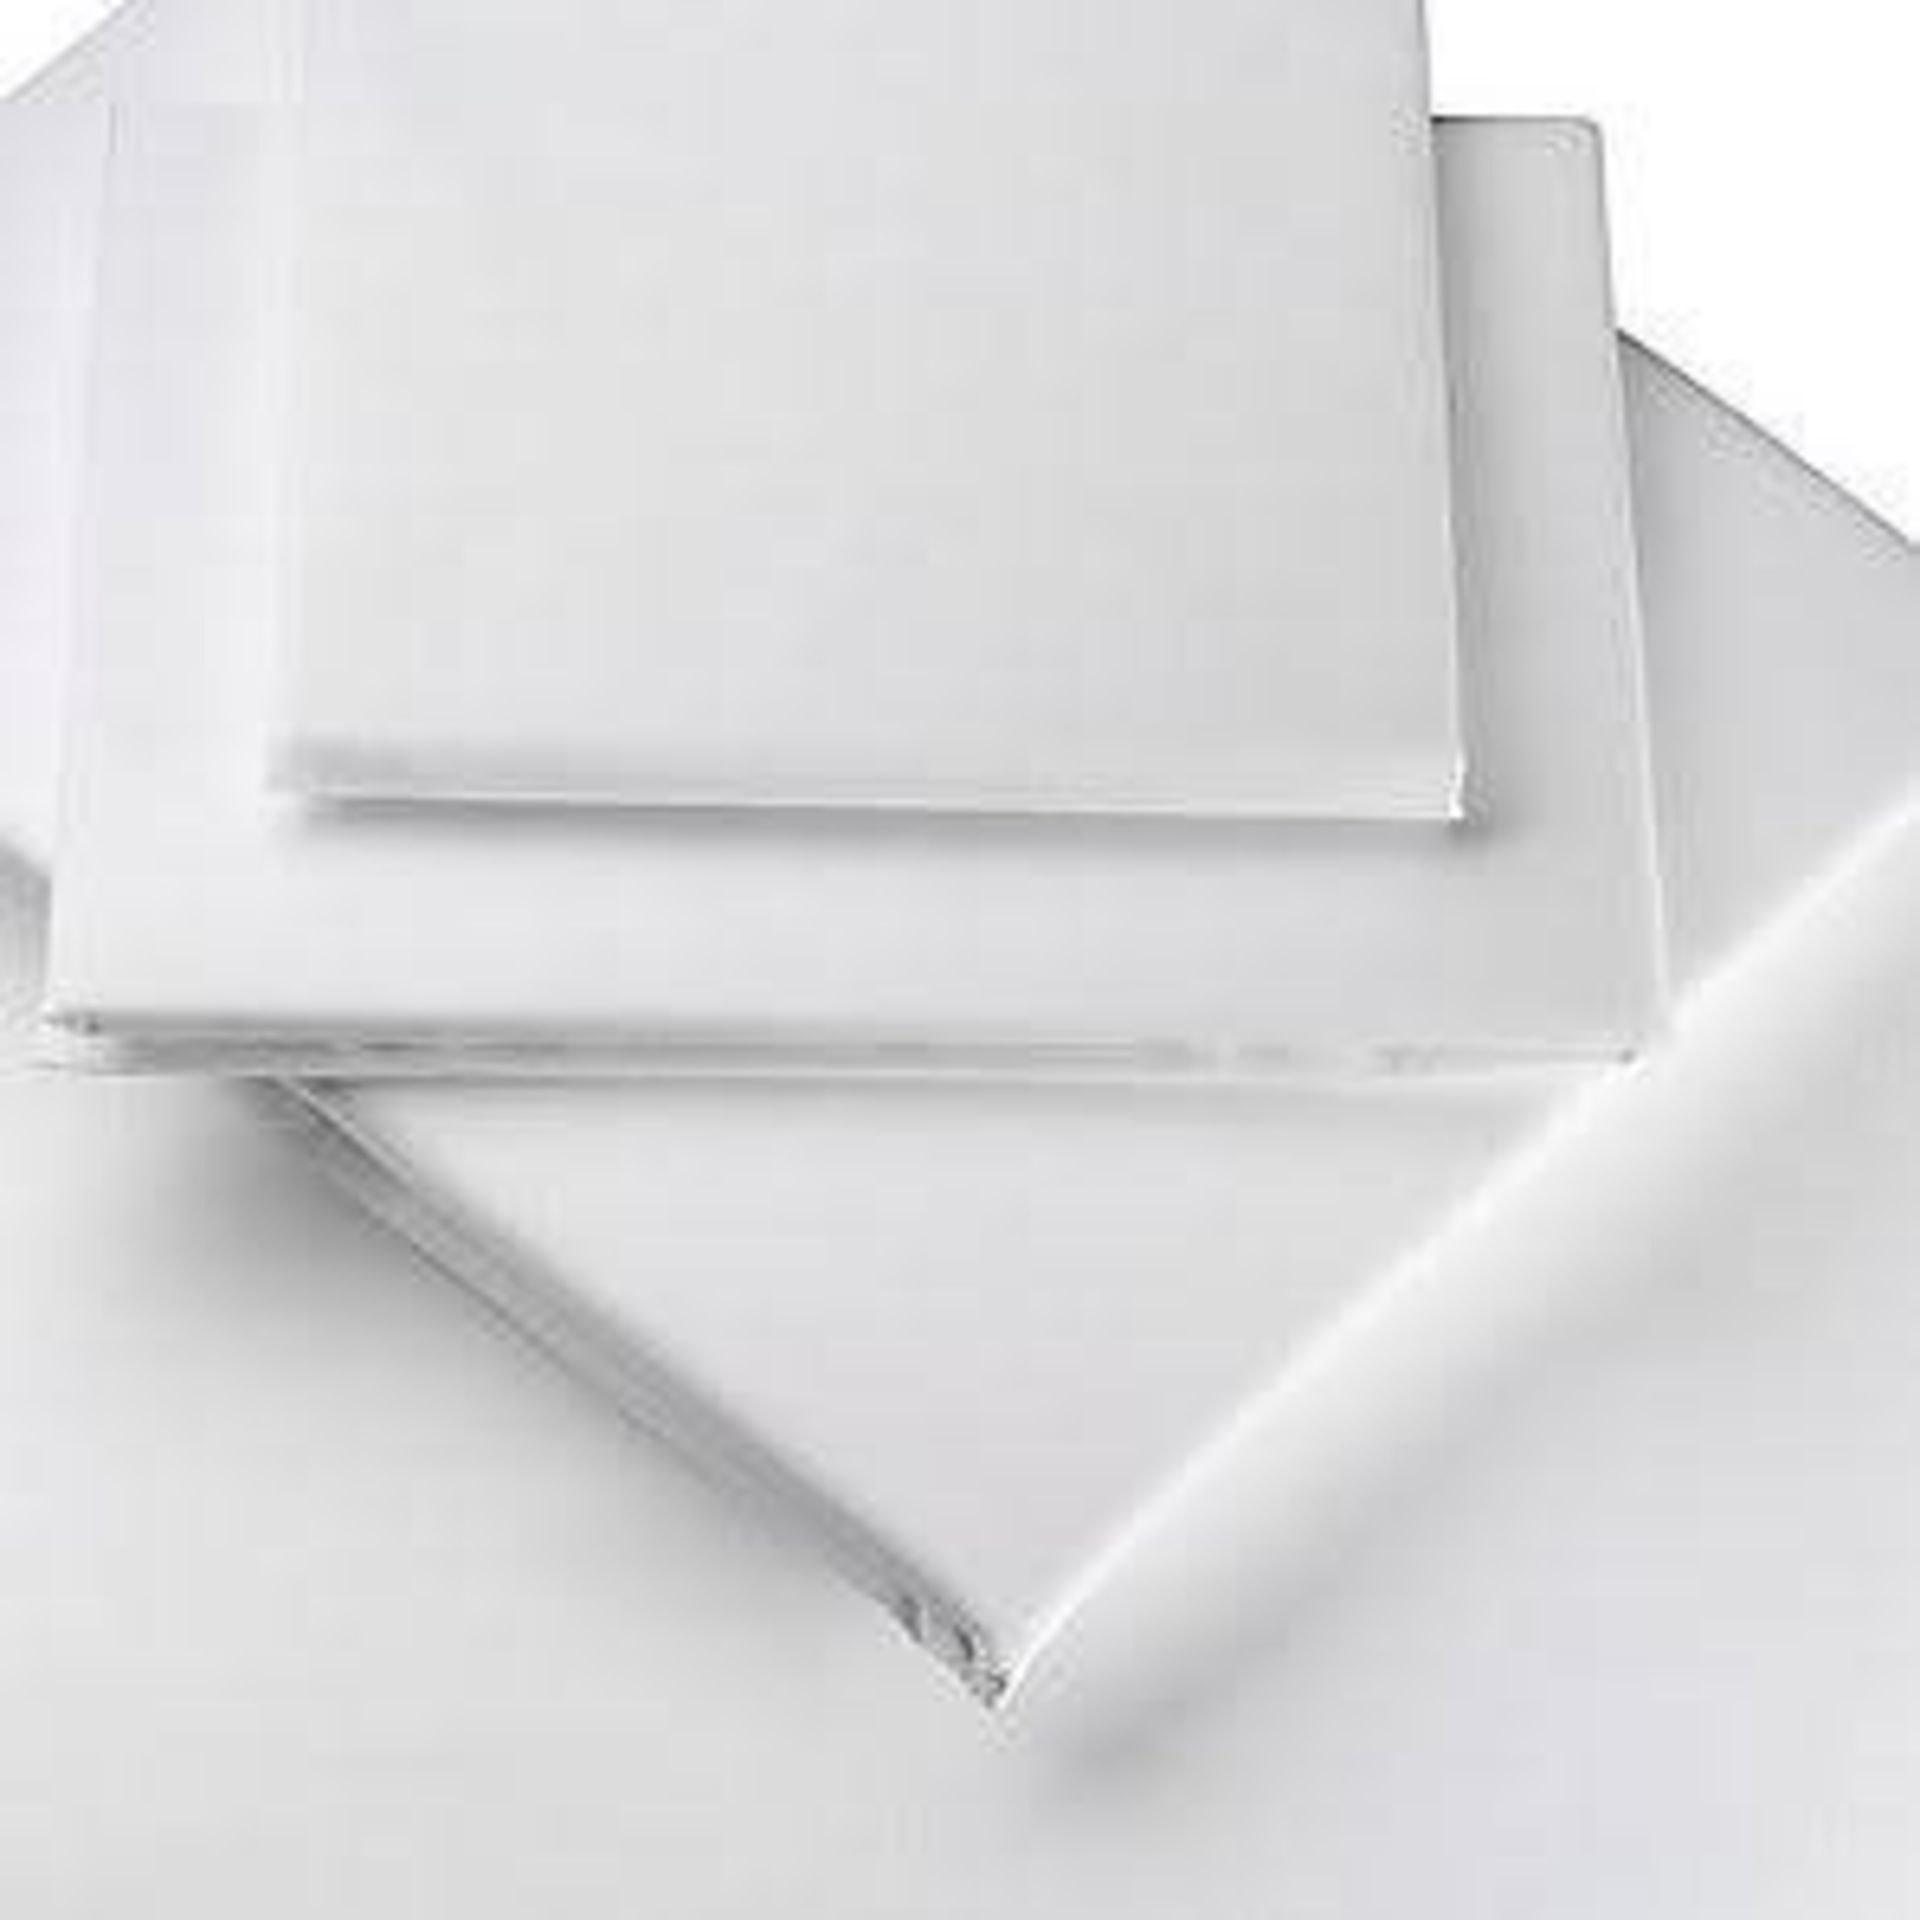 V Brand New Luxury Egyptian Cotton Percale Single Fitted Sheet White ISP £22.99 Homescapes (